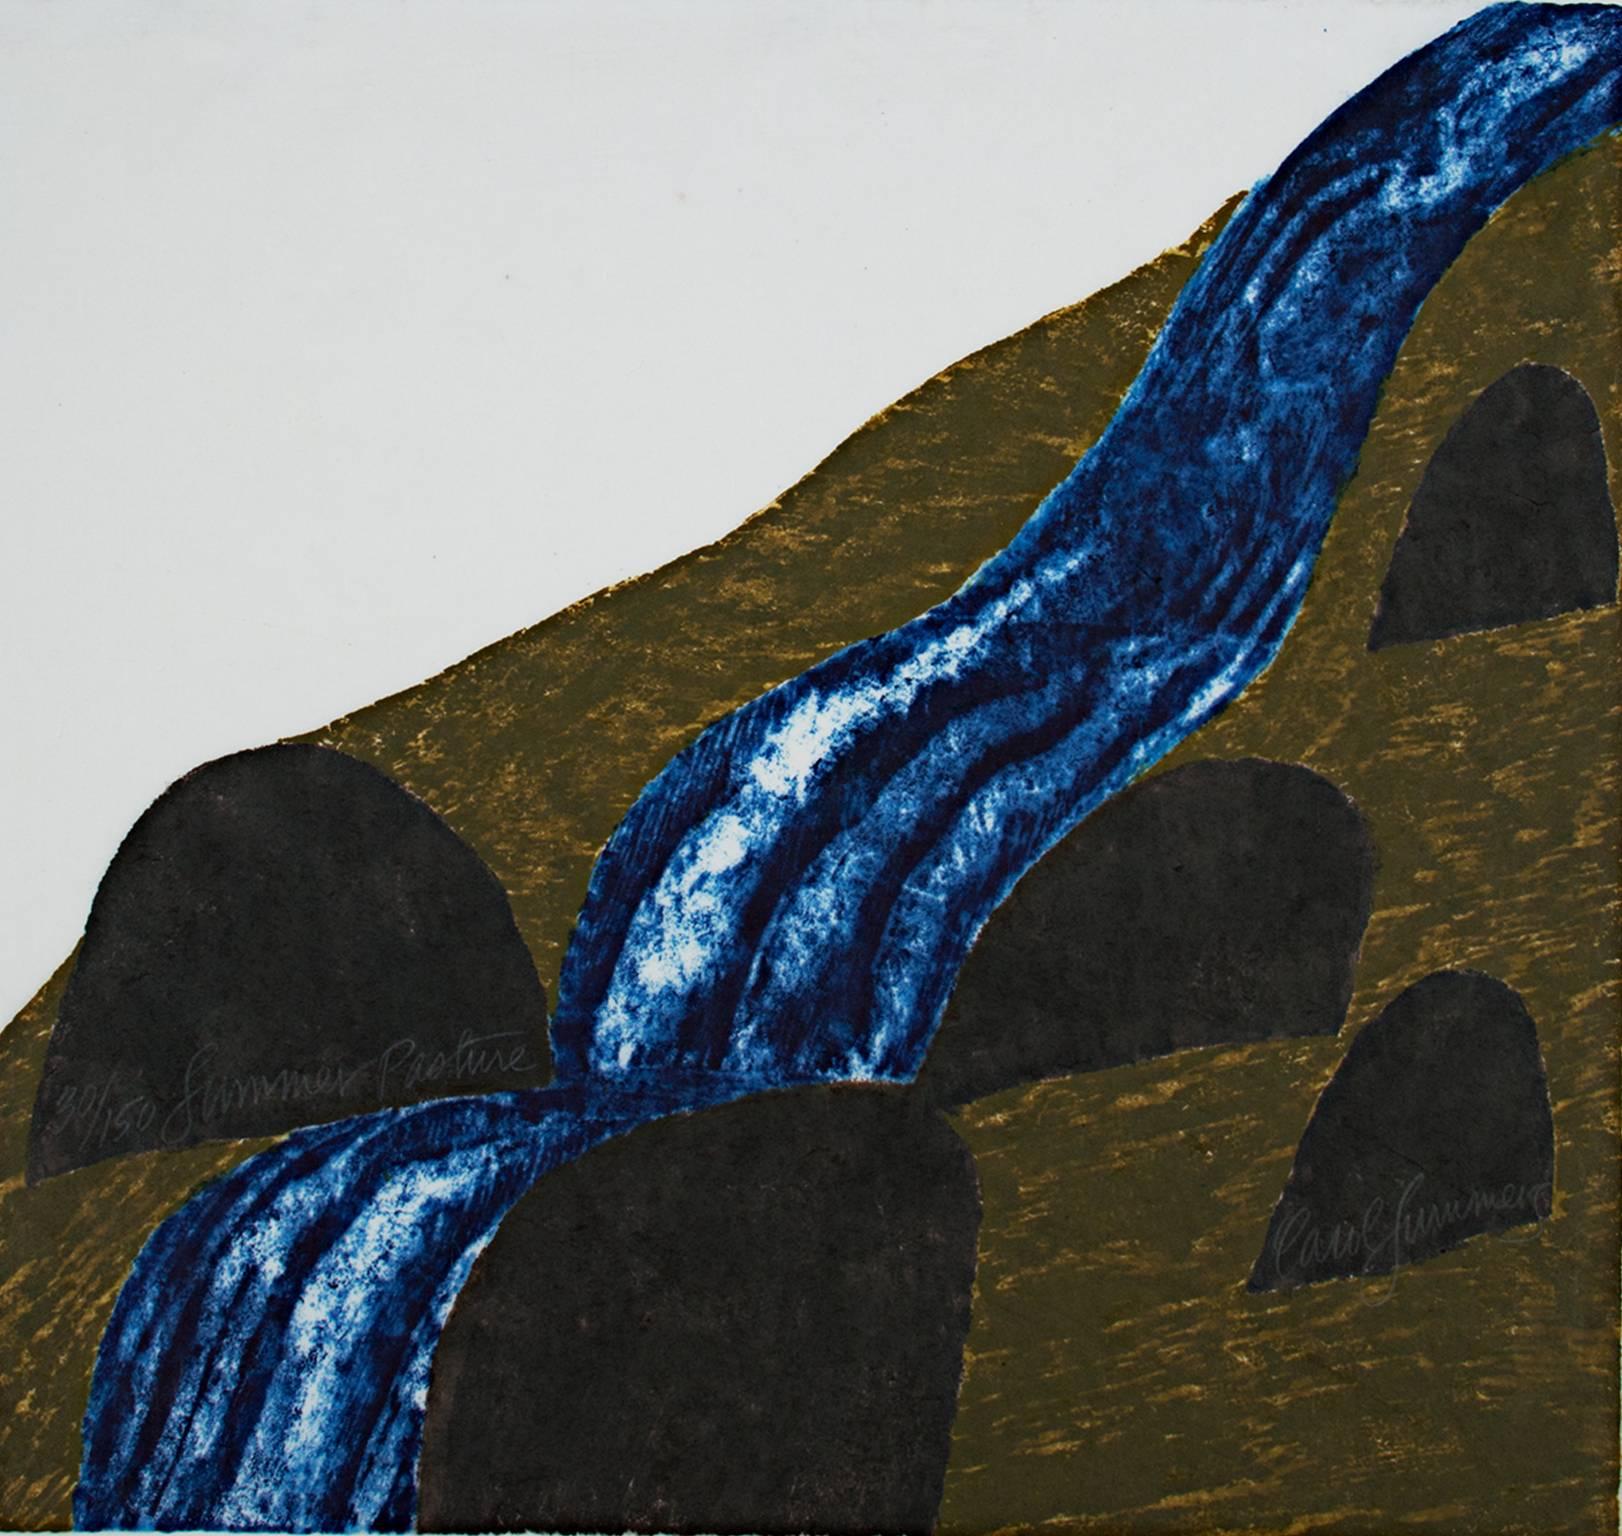 "Summer Pasture" is an original color woodcut by Carol Summers. The artist signed and titled the piece in the rocks in the image. This woodcut depicts a river flowing through an earthy landscape. It is edition 30/150

24 1/2" x 25" art
33 1/8" x 33